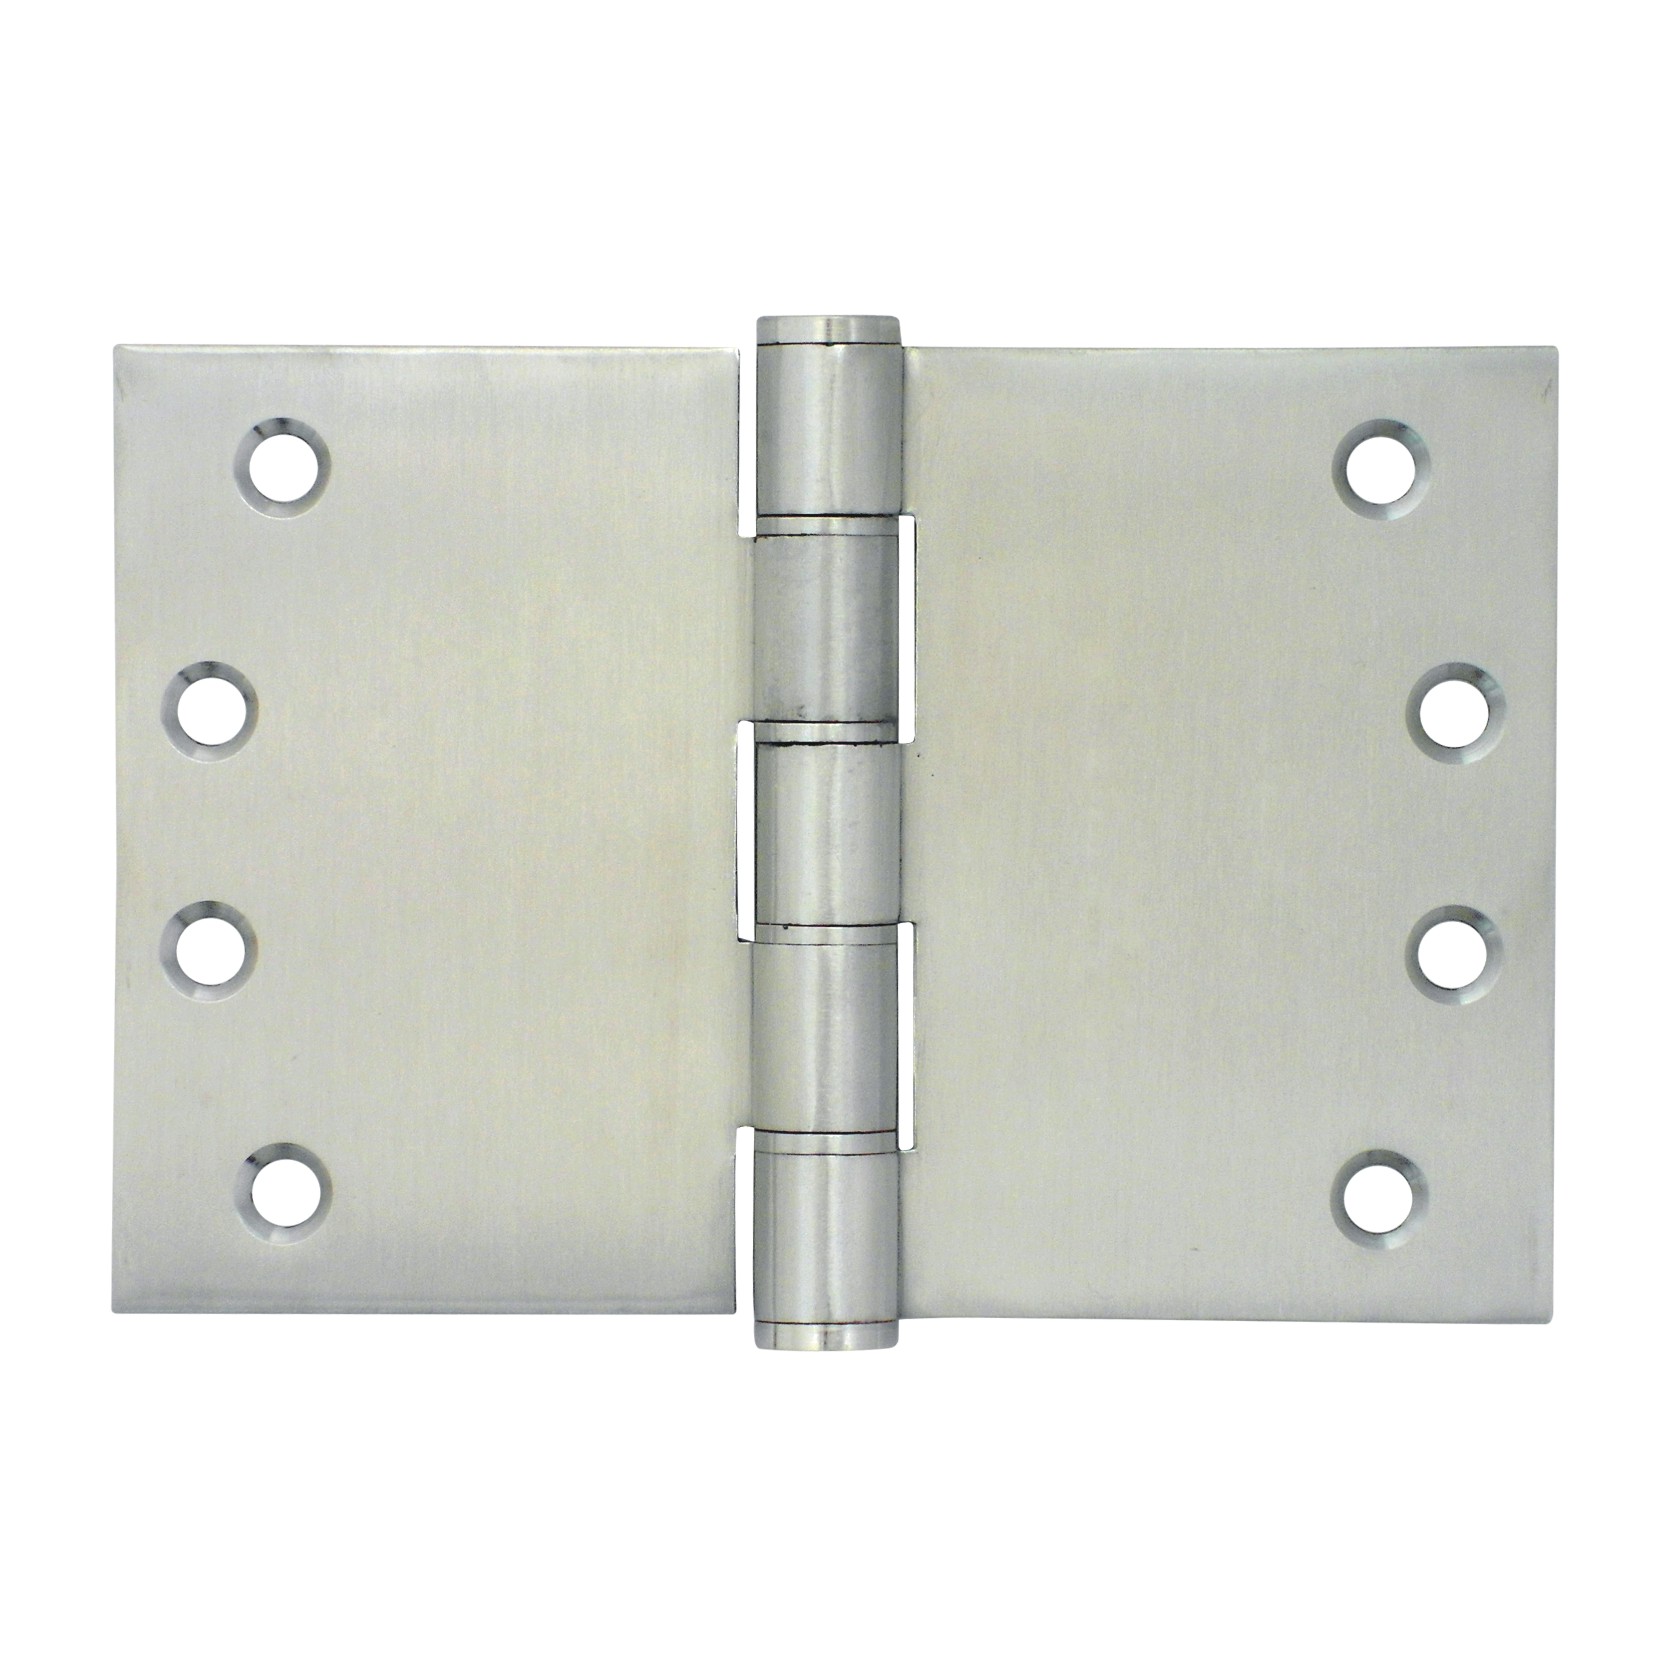 Stainless Steel Projection Hinge-washered -100x200x3.5mm